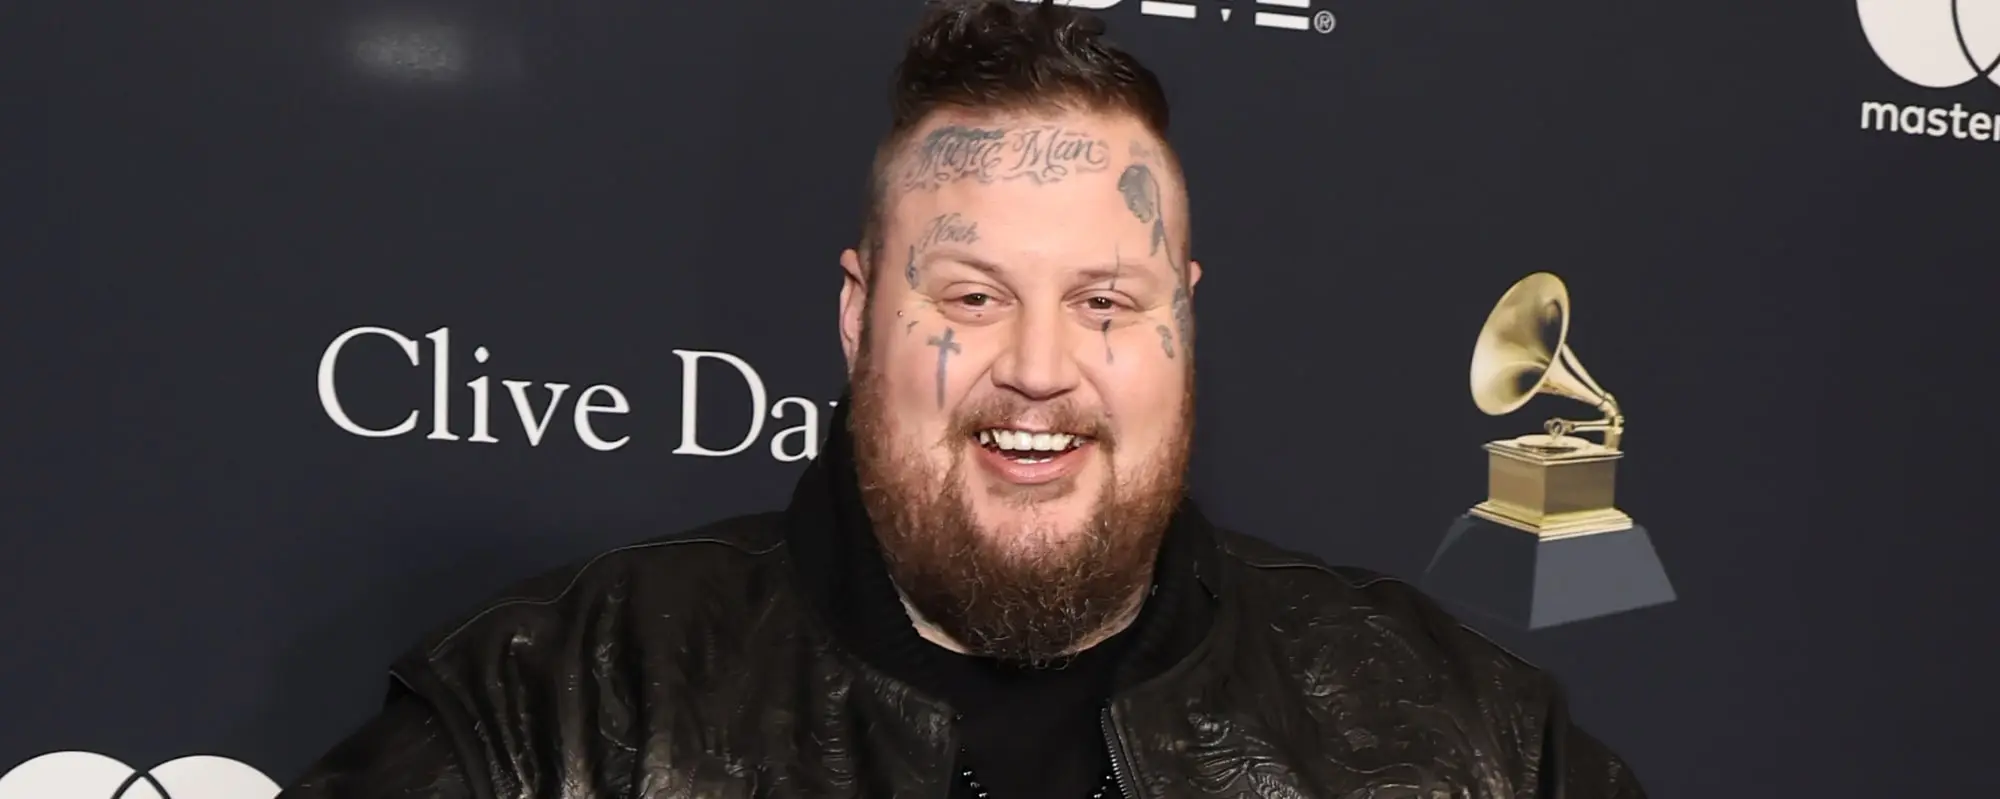 Jelly Roll Reveals What He Brings to the Table As an Expert Mentor on ‘American Idol’